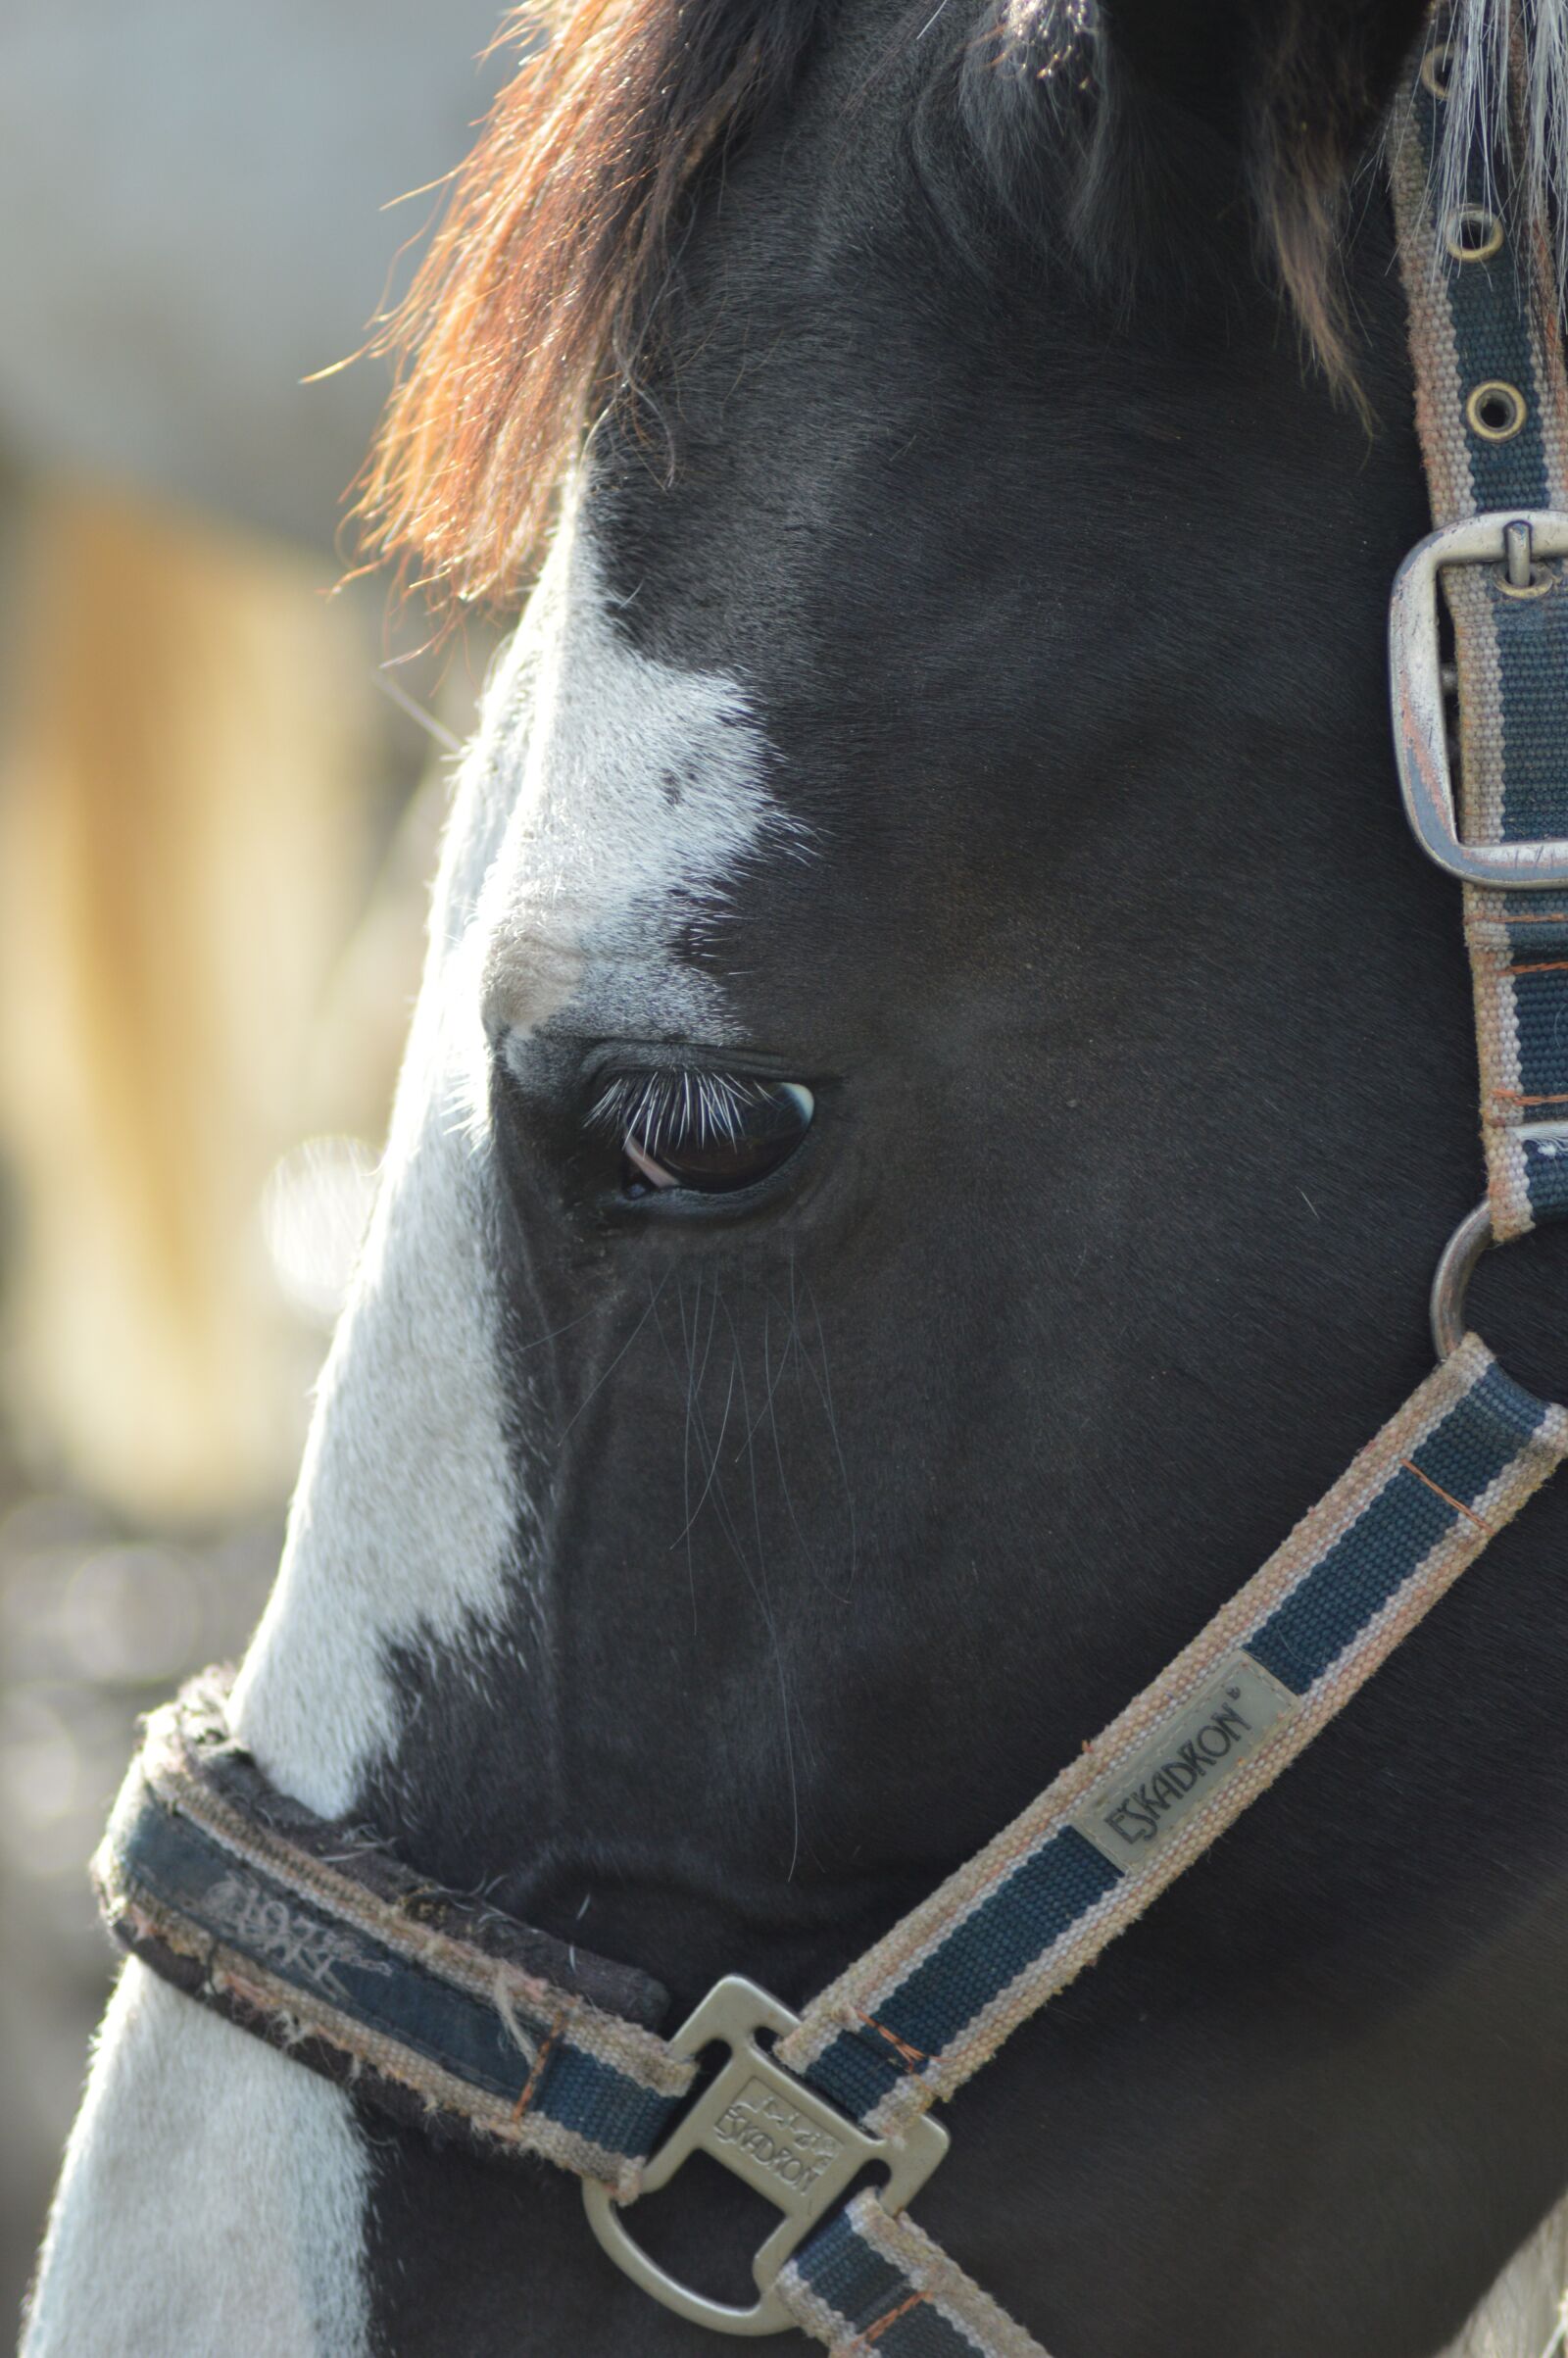 Nikon D3200 sample photo. The horse, harness, bridle photography